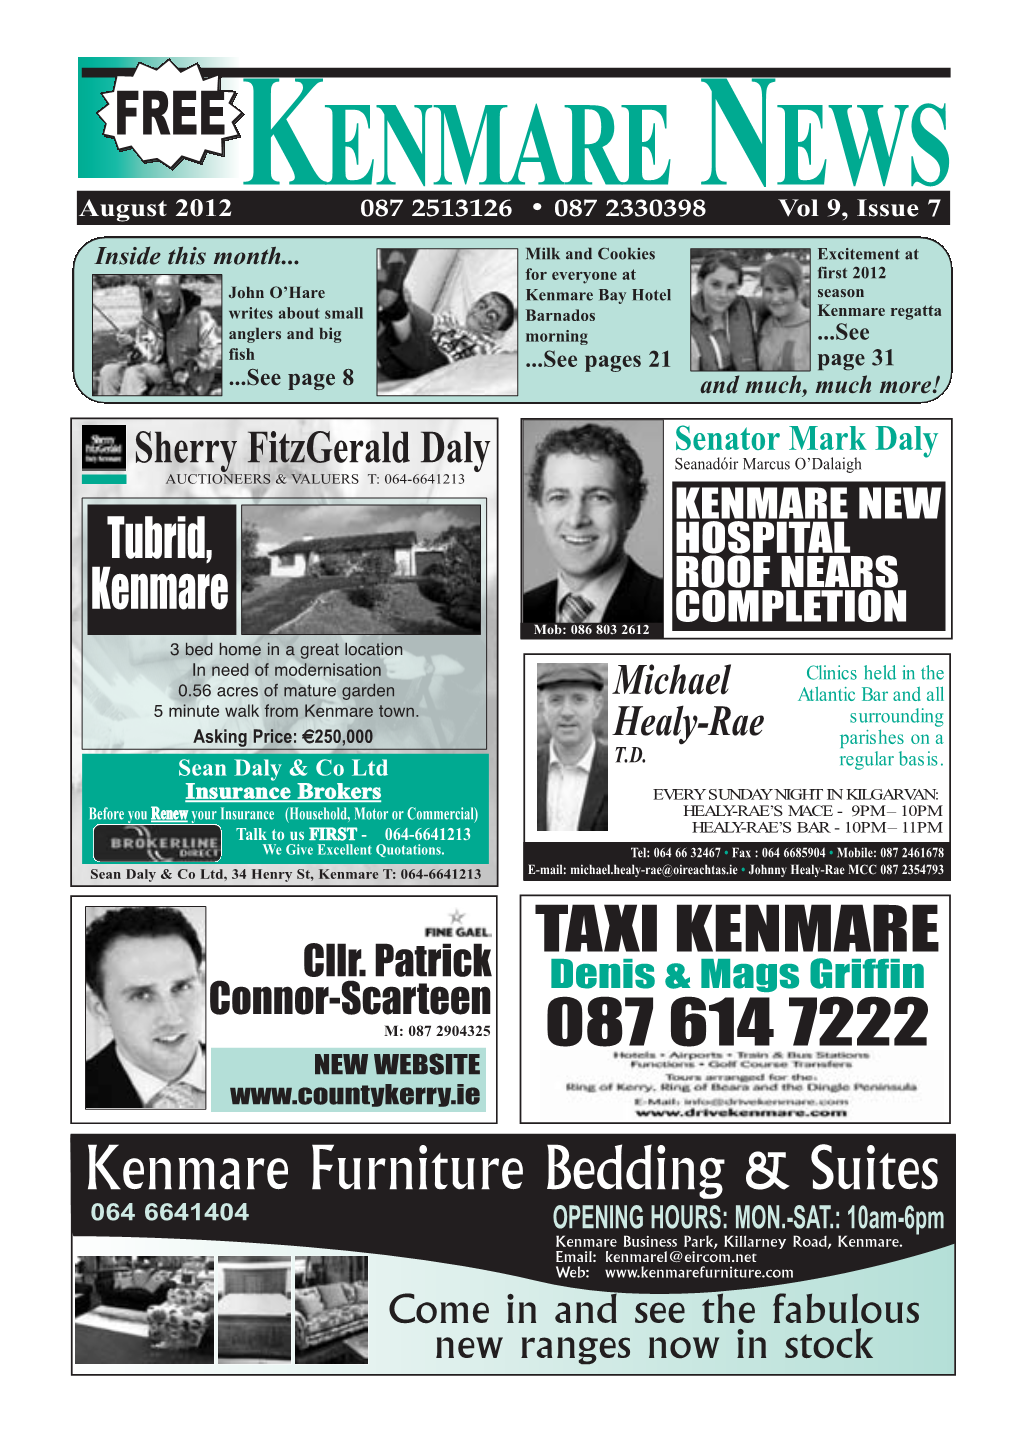 Kenmare Bay Hotel Season Writes About Small Barnados Kenmare Regatta Anglers and Big Morning ...See Fish ...See Pages 21 Page 31 ...See Page 8 and Much, Much More!